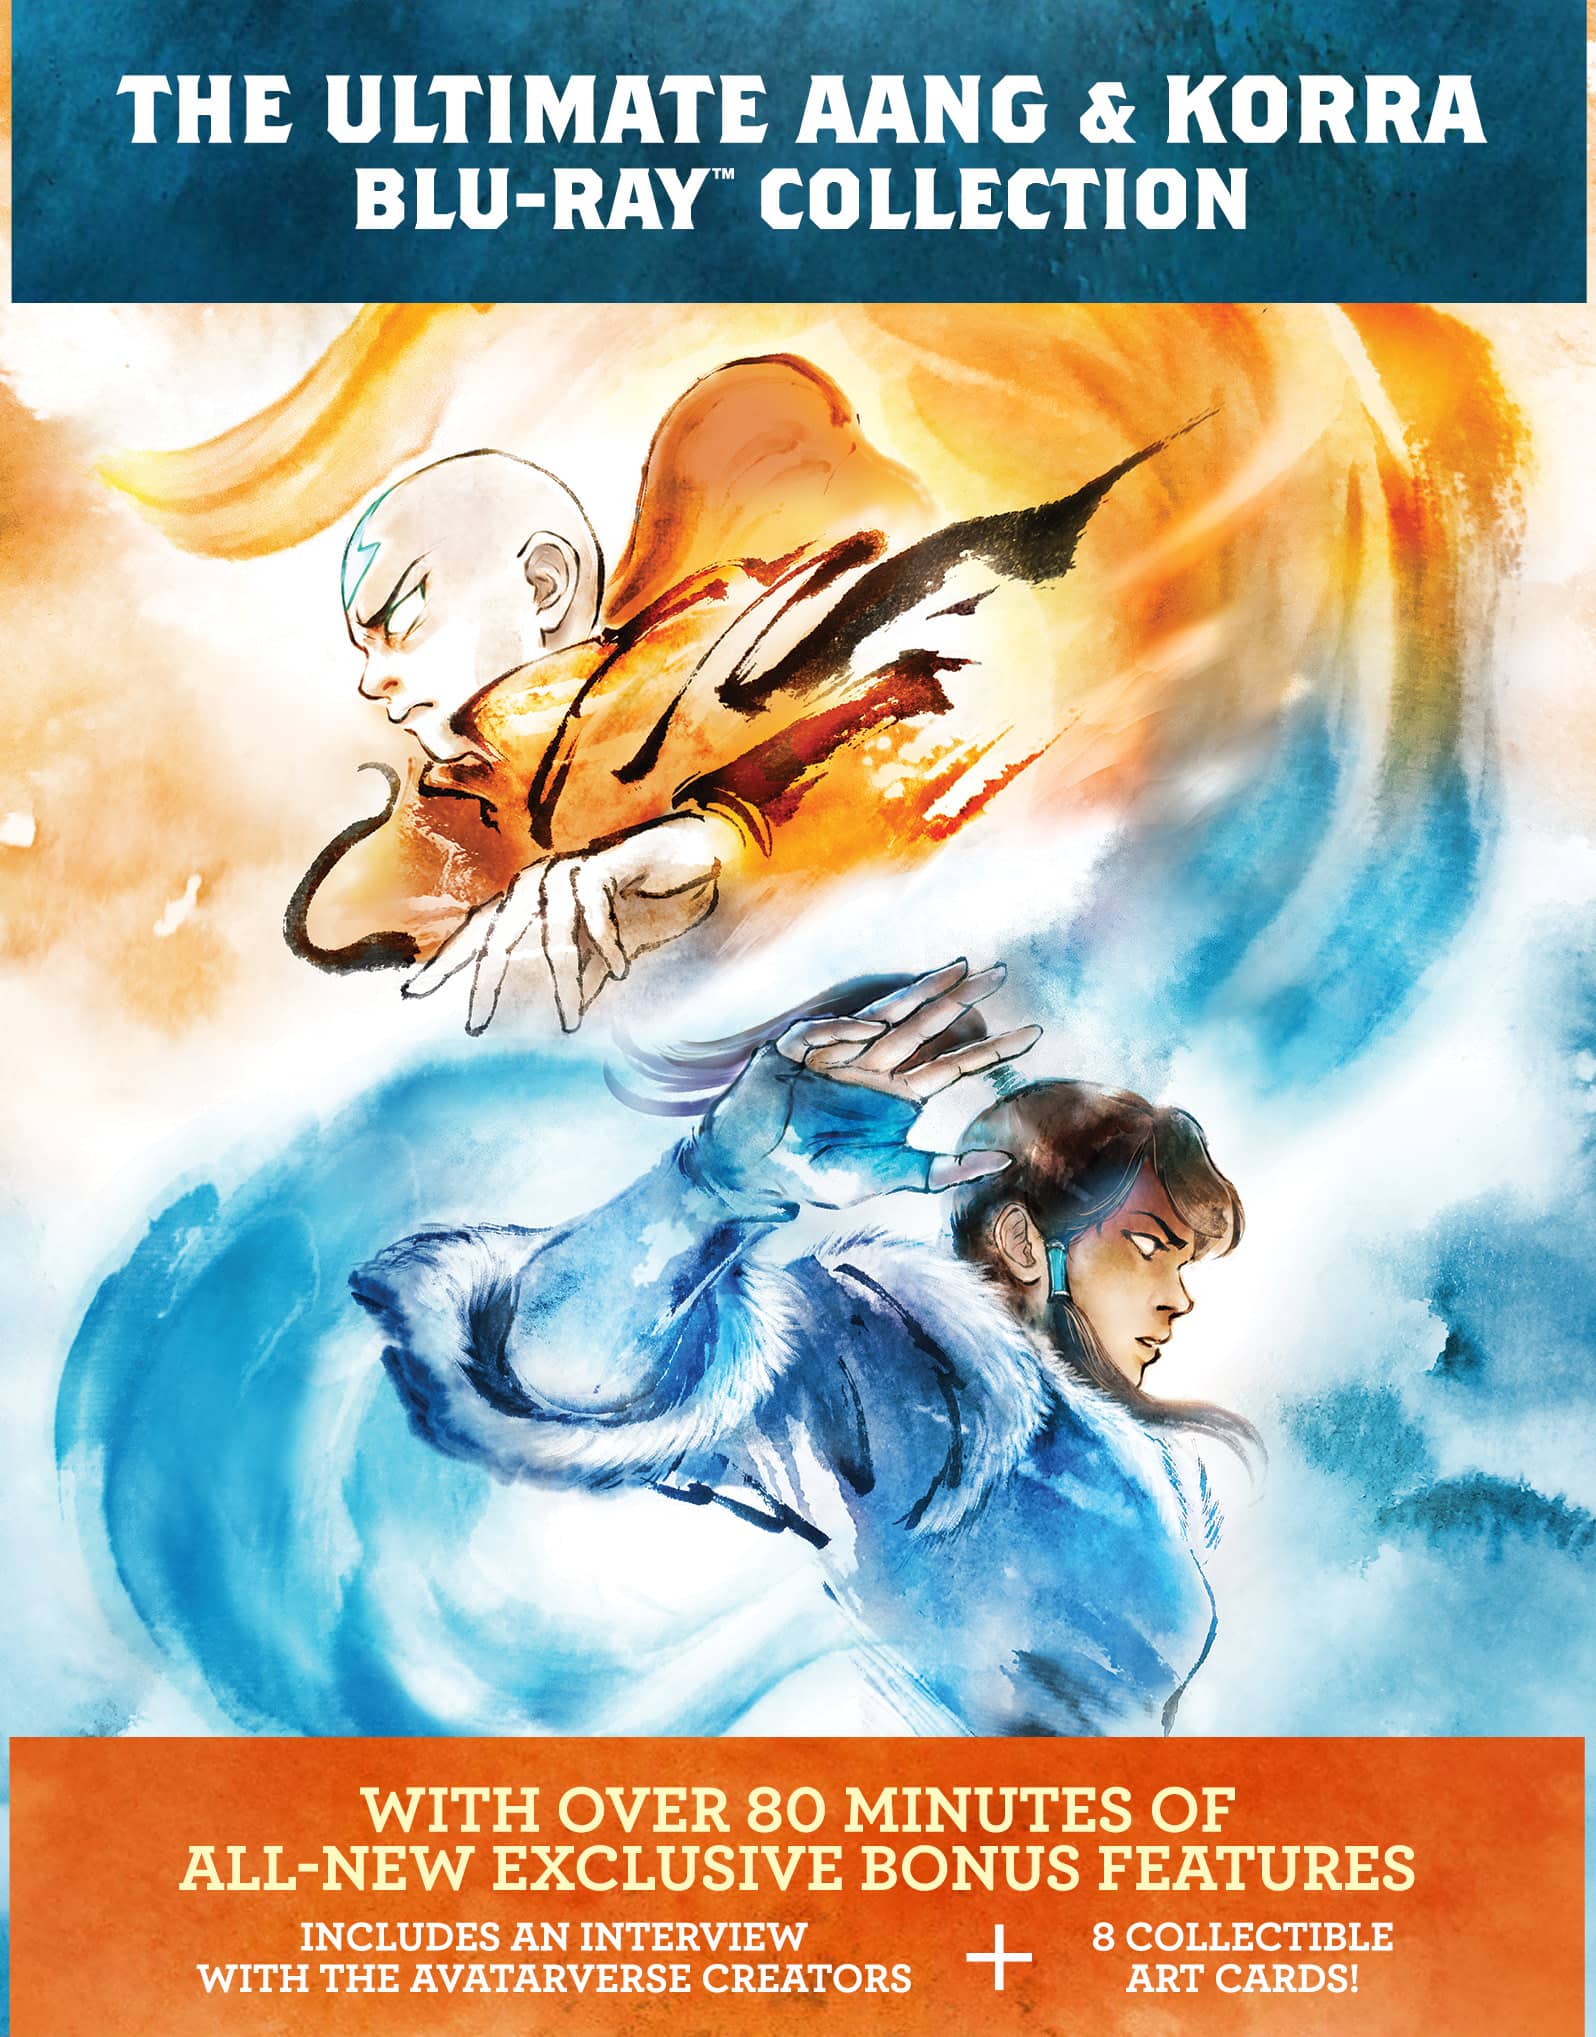 Ultimate Aang & Korra Blu-ray Collection special features